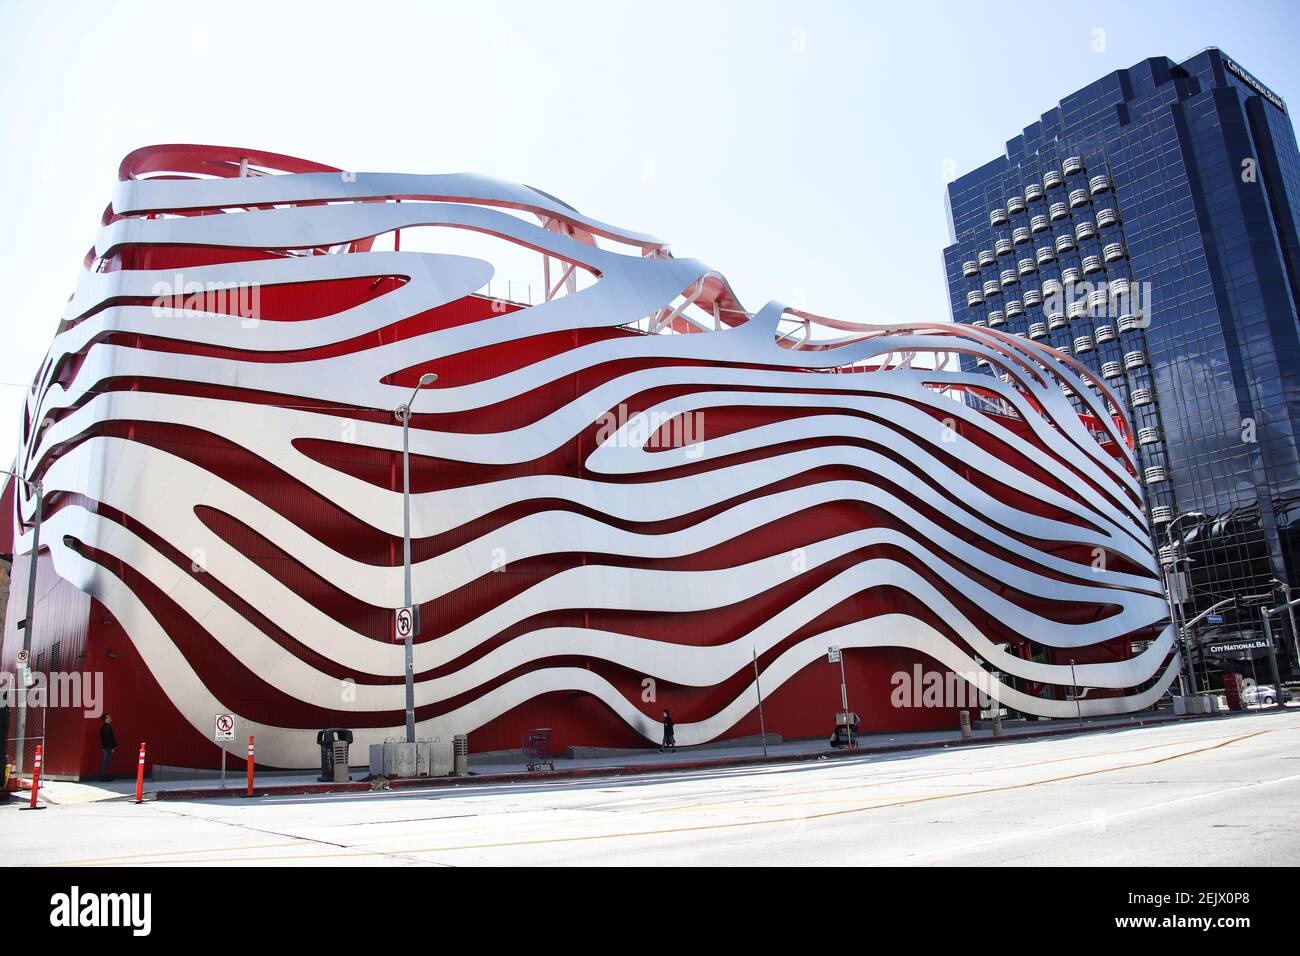 BEVERLY HILLS, LOS ANGELES, CALIFORNIA, USA - MARCH 21: Petersen Automotive Museum, temporarily closed due to the coronavirus, two days after the 'Safer at Home' order issued by both Los Angeles Mayor Eric Garcetti at the county level and California Governor Gavin Newsom at the state level on Thursday, March 19, 2020 which will stay in effect until at least April 19, 2020 amid the Coronavirus COVID-19 pandemic, March 21, 2020 in Beverly Hills, Los Angeles, California, United States. (Photo by Xavier Collin/Image Press Agency/Sipa USA) Stock Photo